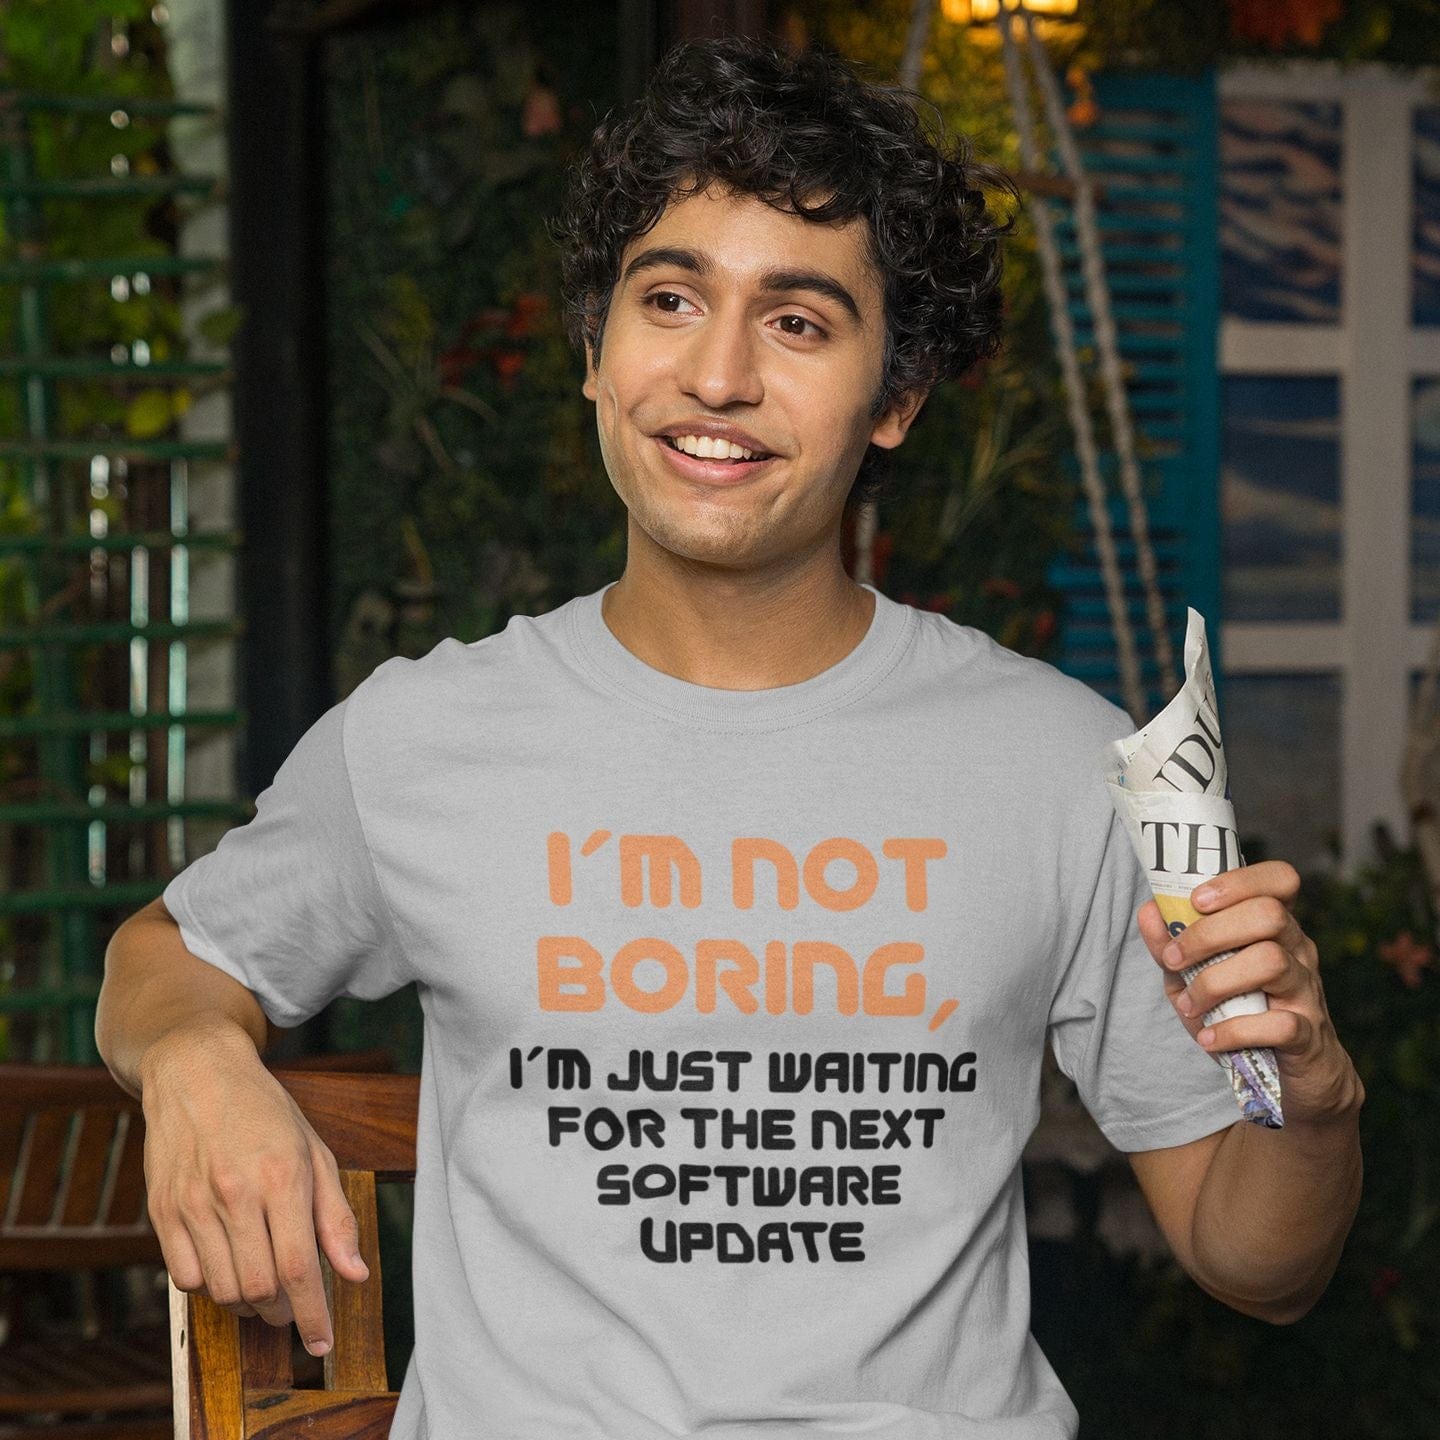 I'm Not Boring, I'm Just Waiting for the Next Software Update - Men's T-Shirt